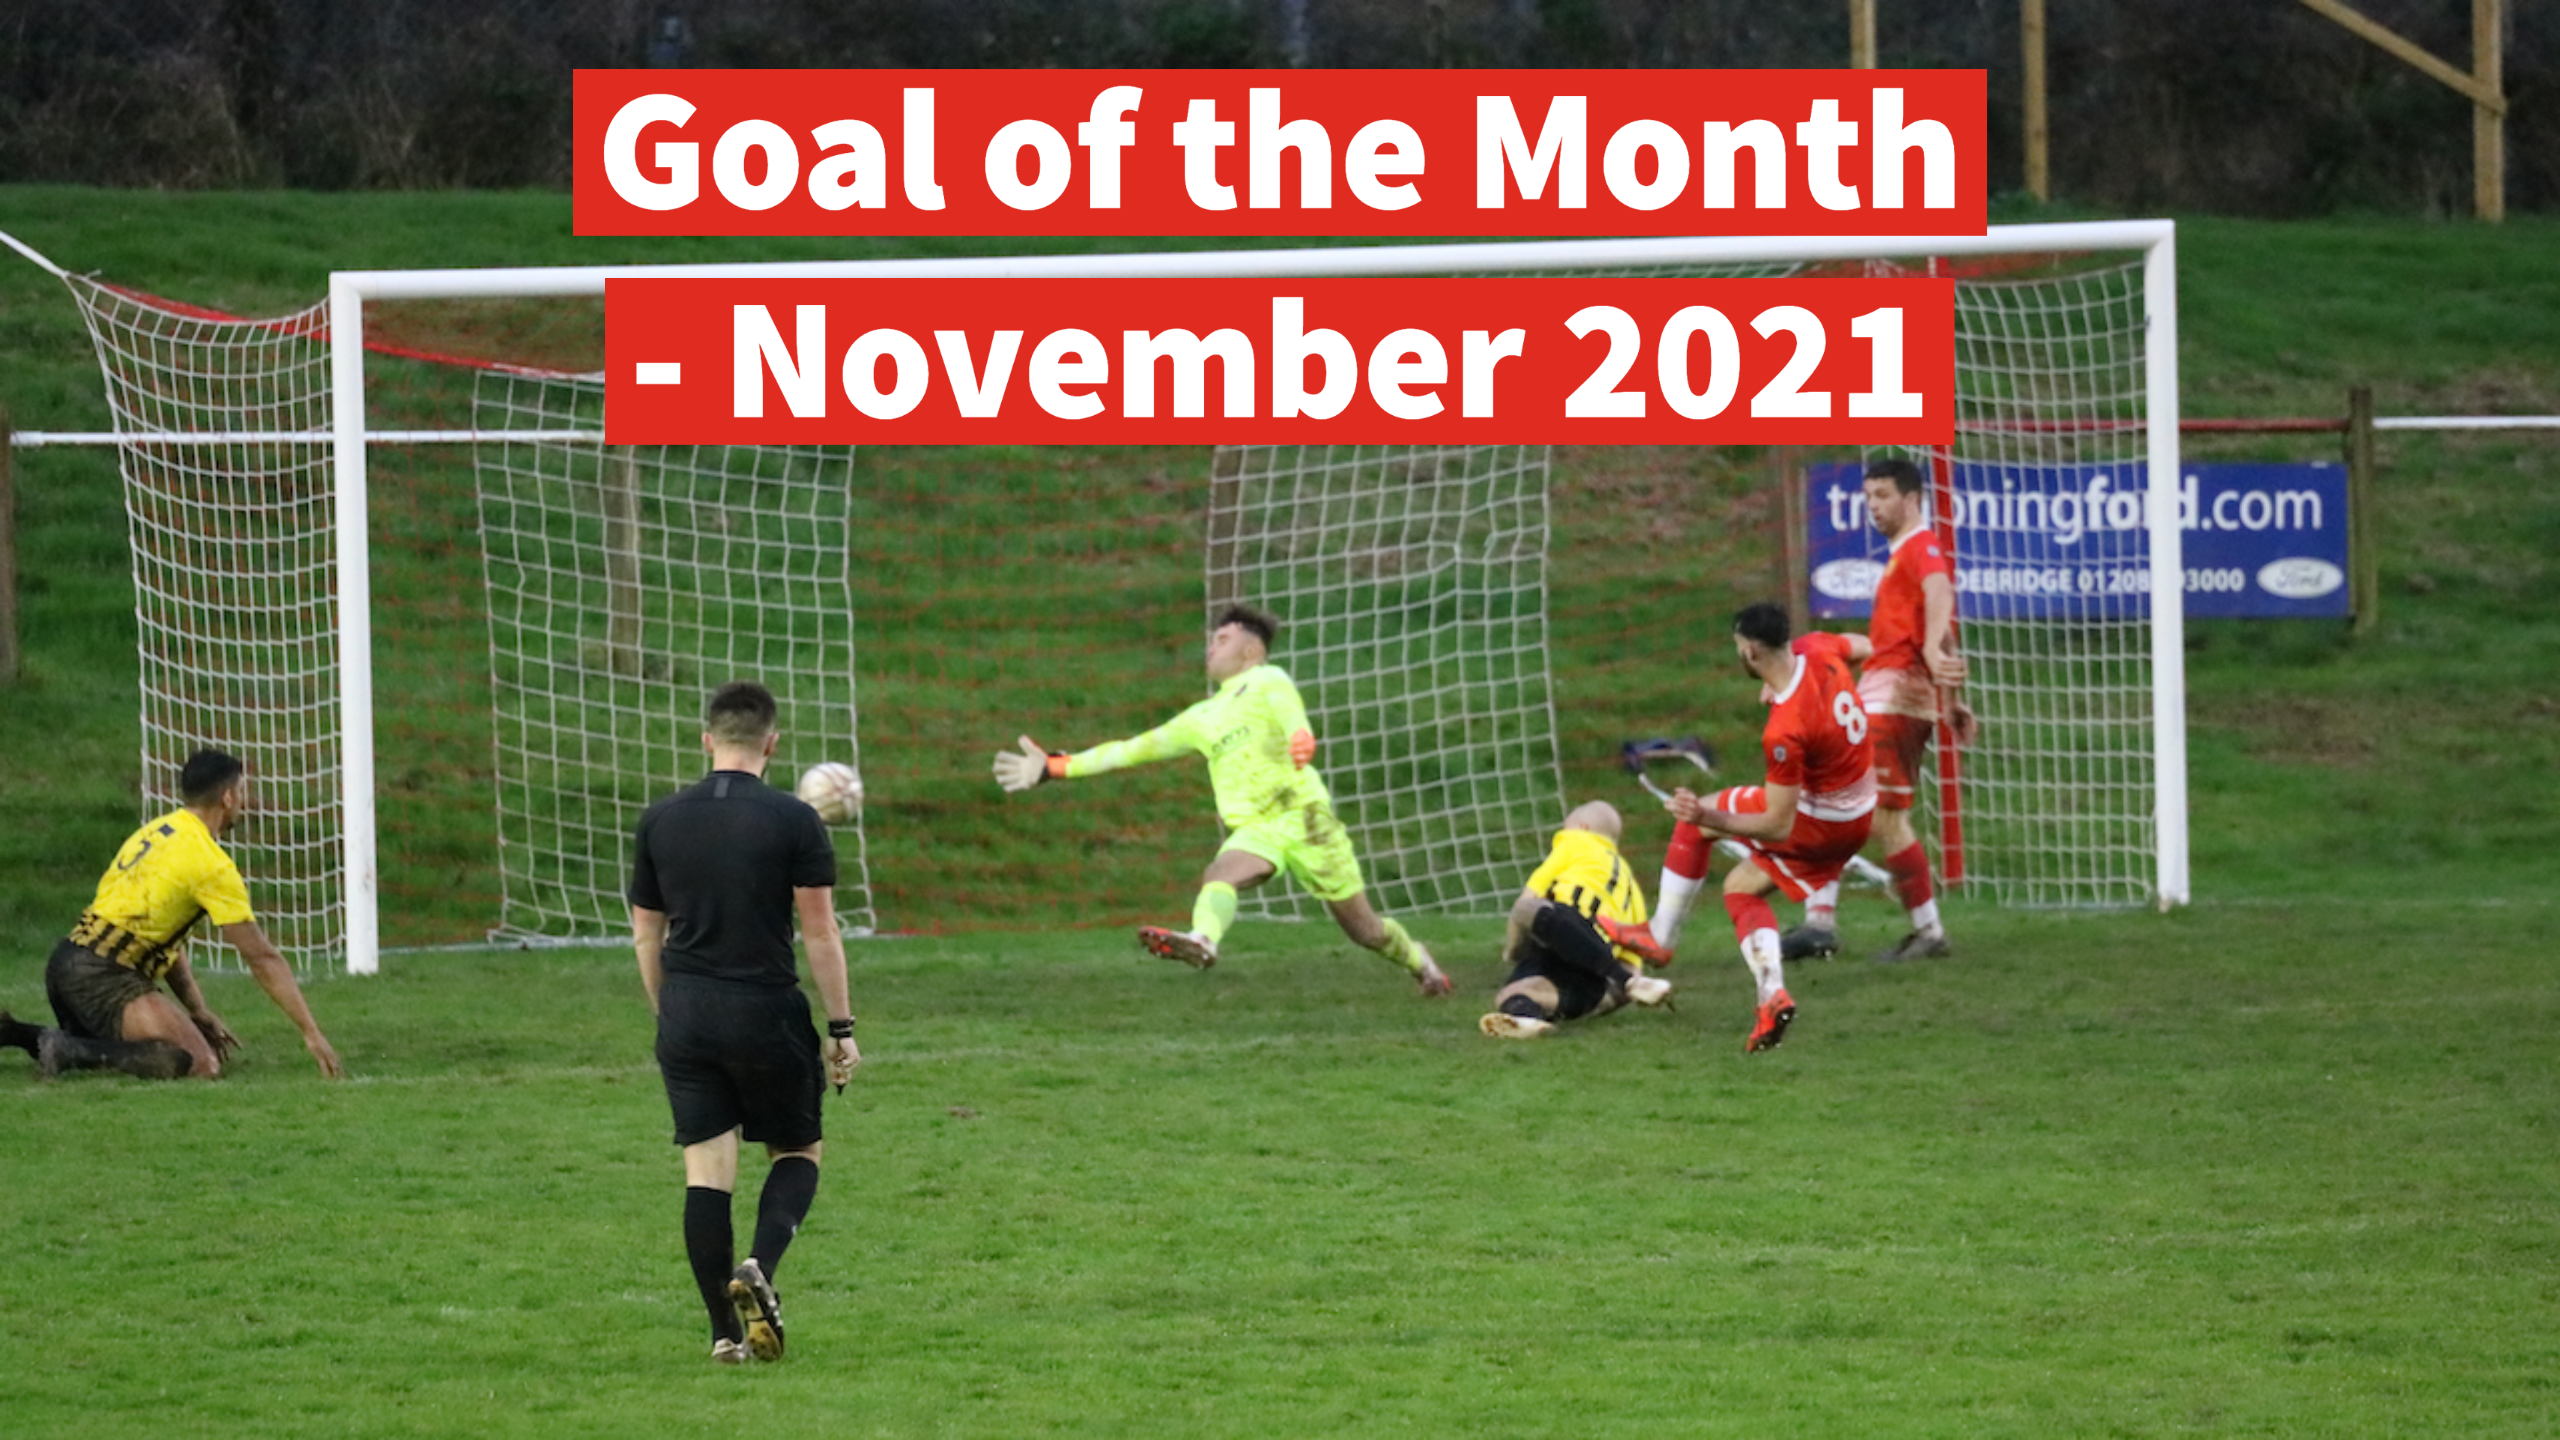 Goal of the Month - November 2021